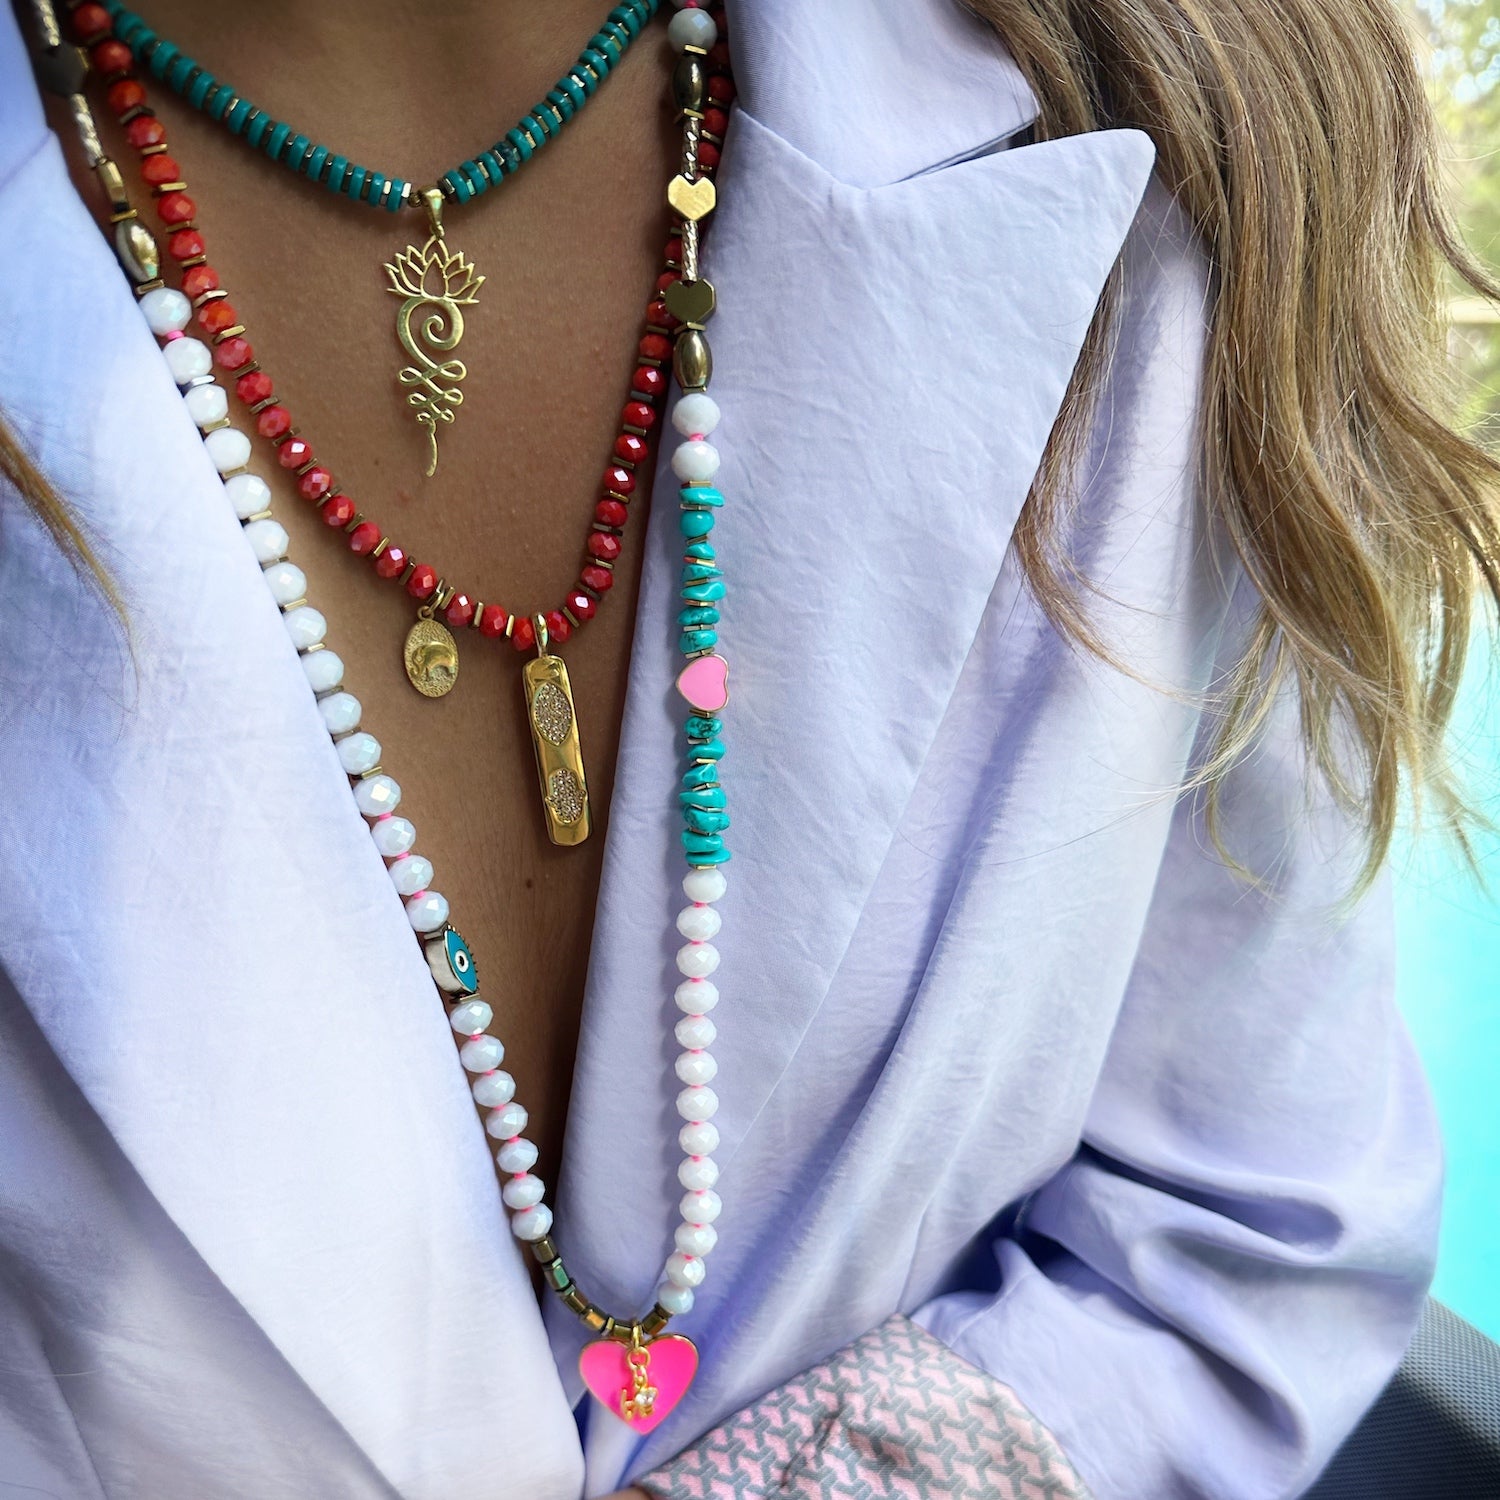 Model wearing the beautiful Eternal Love Necklace, featuring turquoise nugget beads and gold accents.